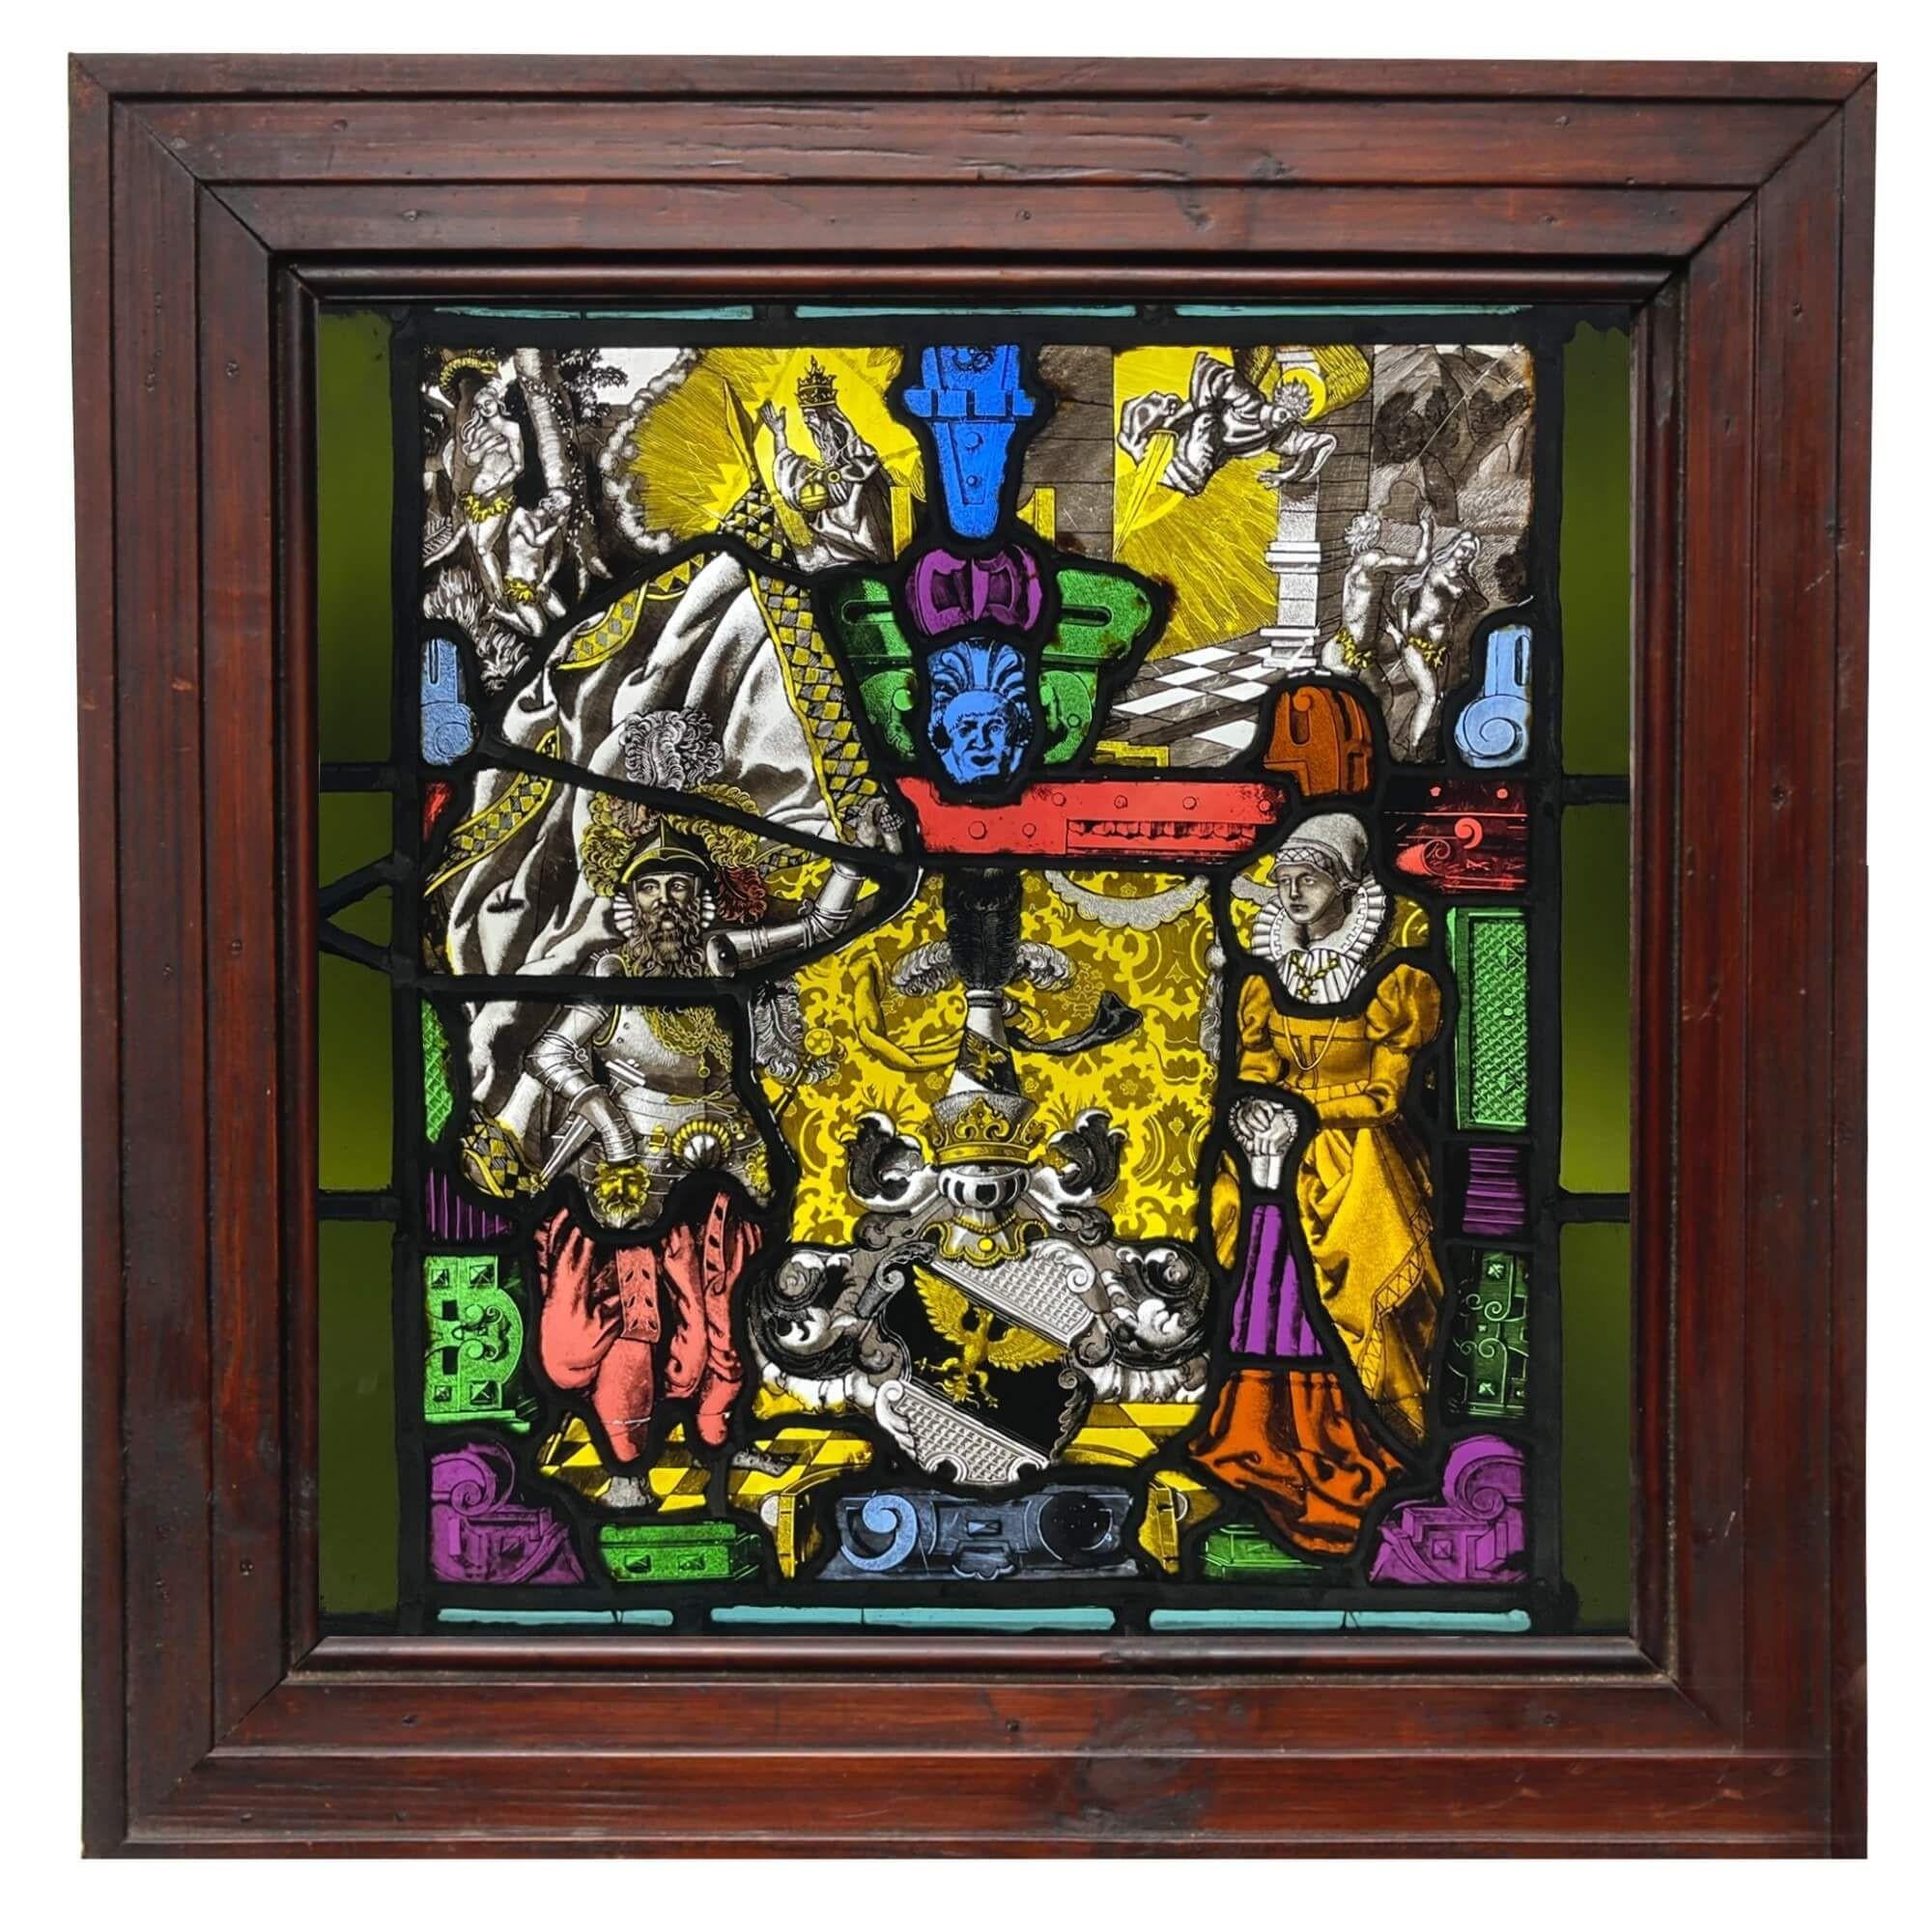 A mid 19th century German antique stained glass window depicting an exceptionally detailed and colourful scene with heraldic and ecclesiastical themes. The design centres around a coat of arms to the lower half, possibly of German origin, between